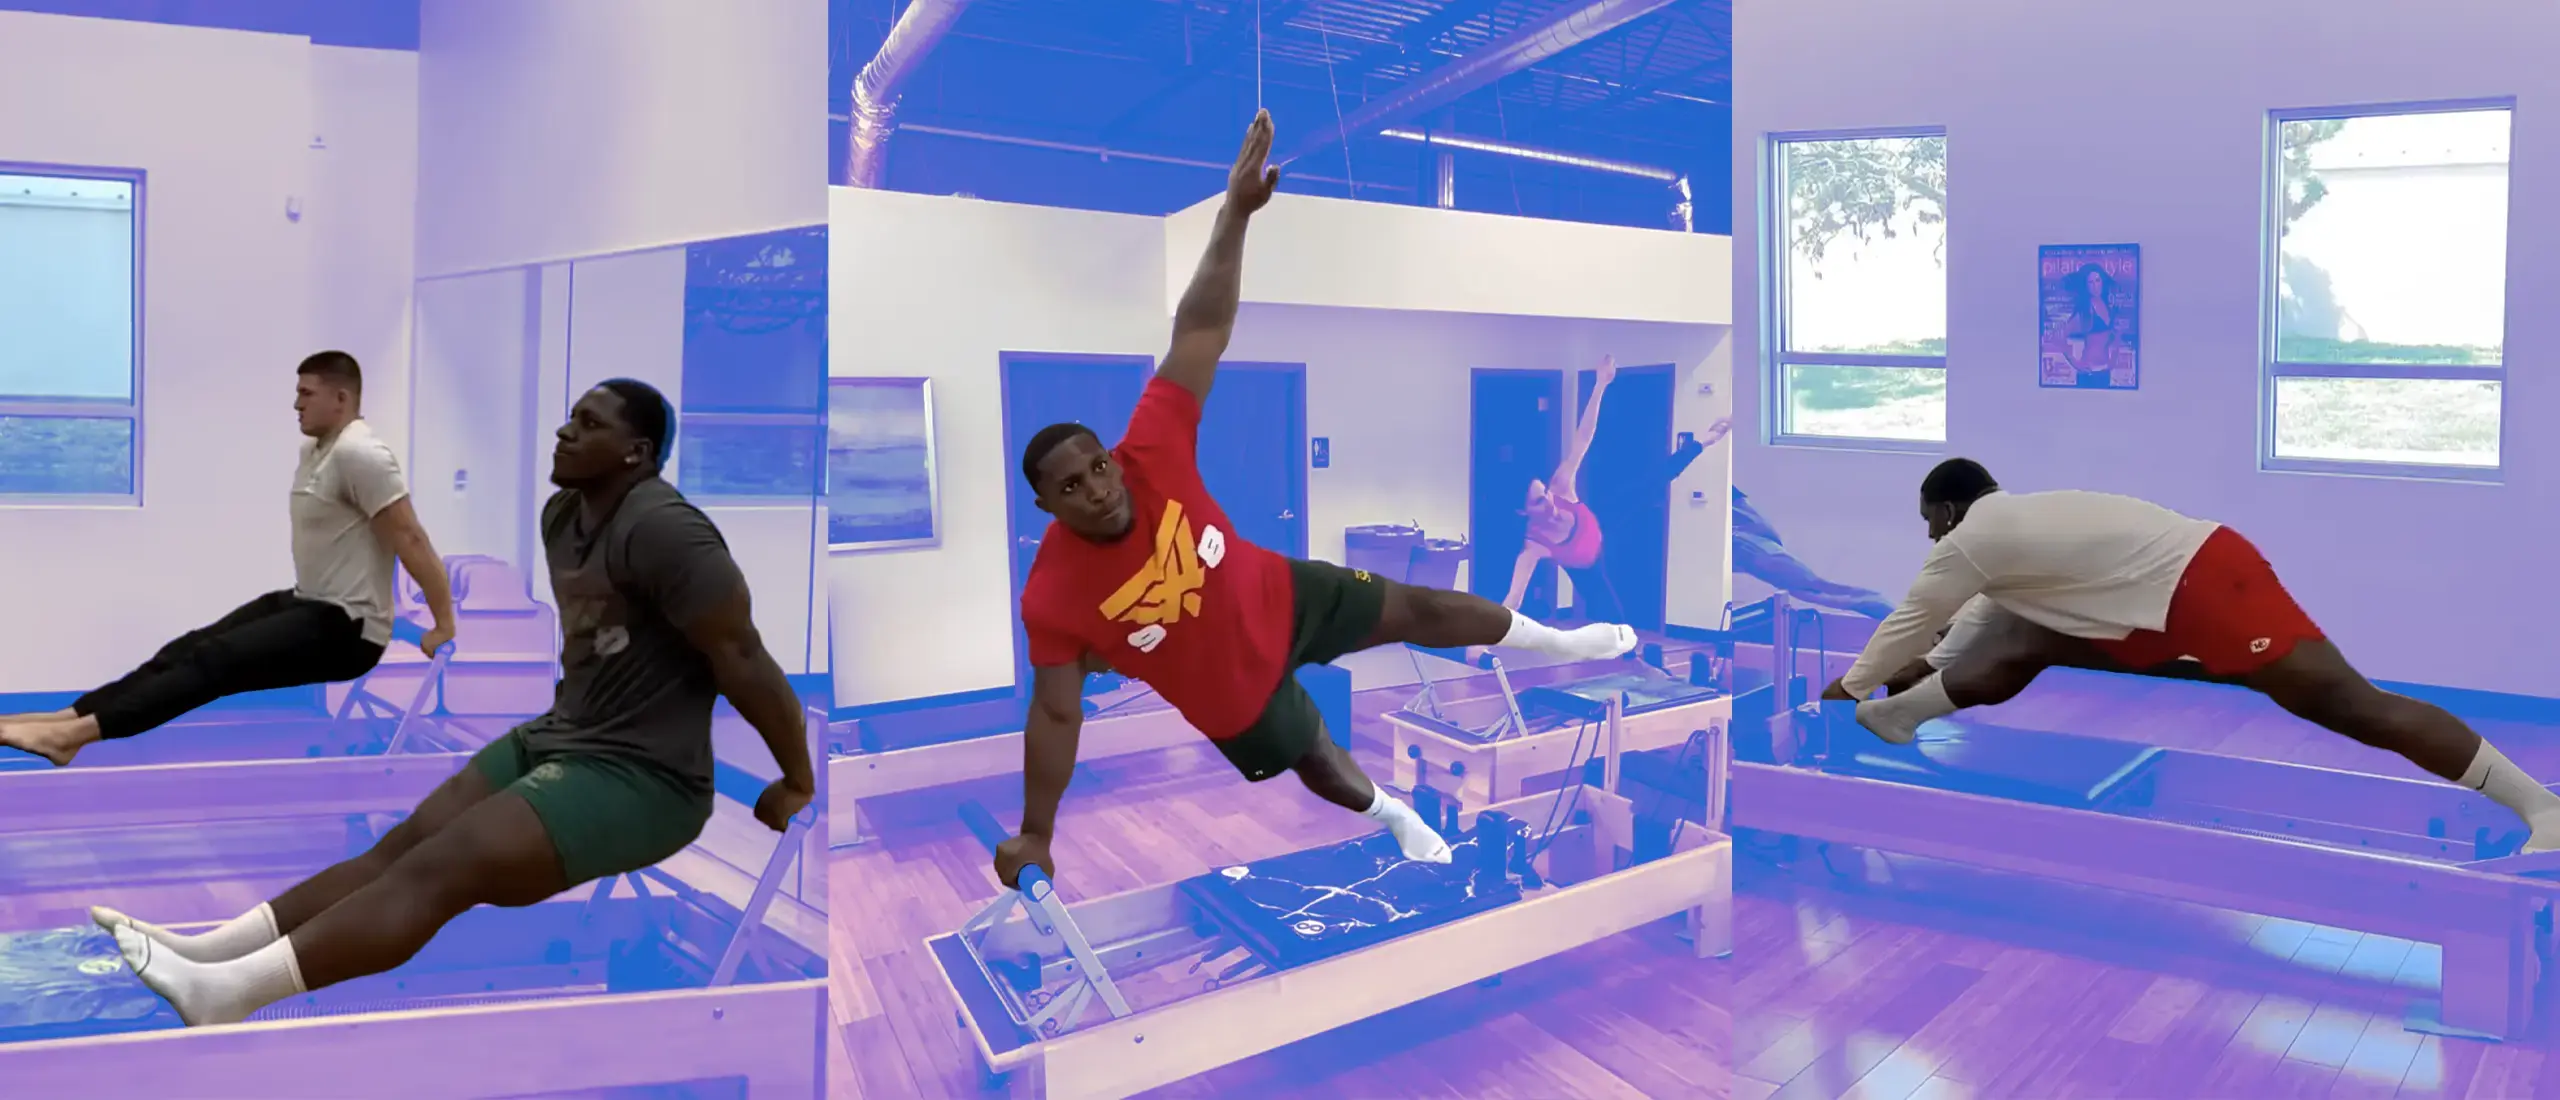 Feet in straps on X: Train like a champion with Pilates gear from Balanced  Body, trusted by the reigning champs, the @KansasCityChiefs! Use code  JOHNDEYOUNGFITNESSLA for extra 5% discount. Call 1-800-PILATES to